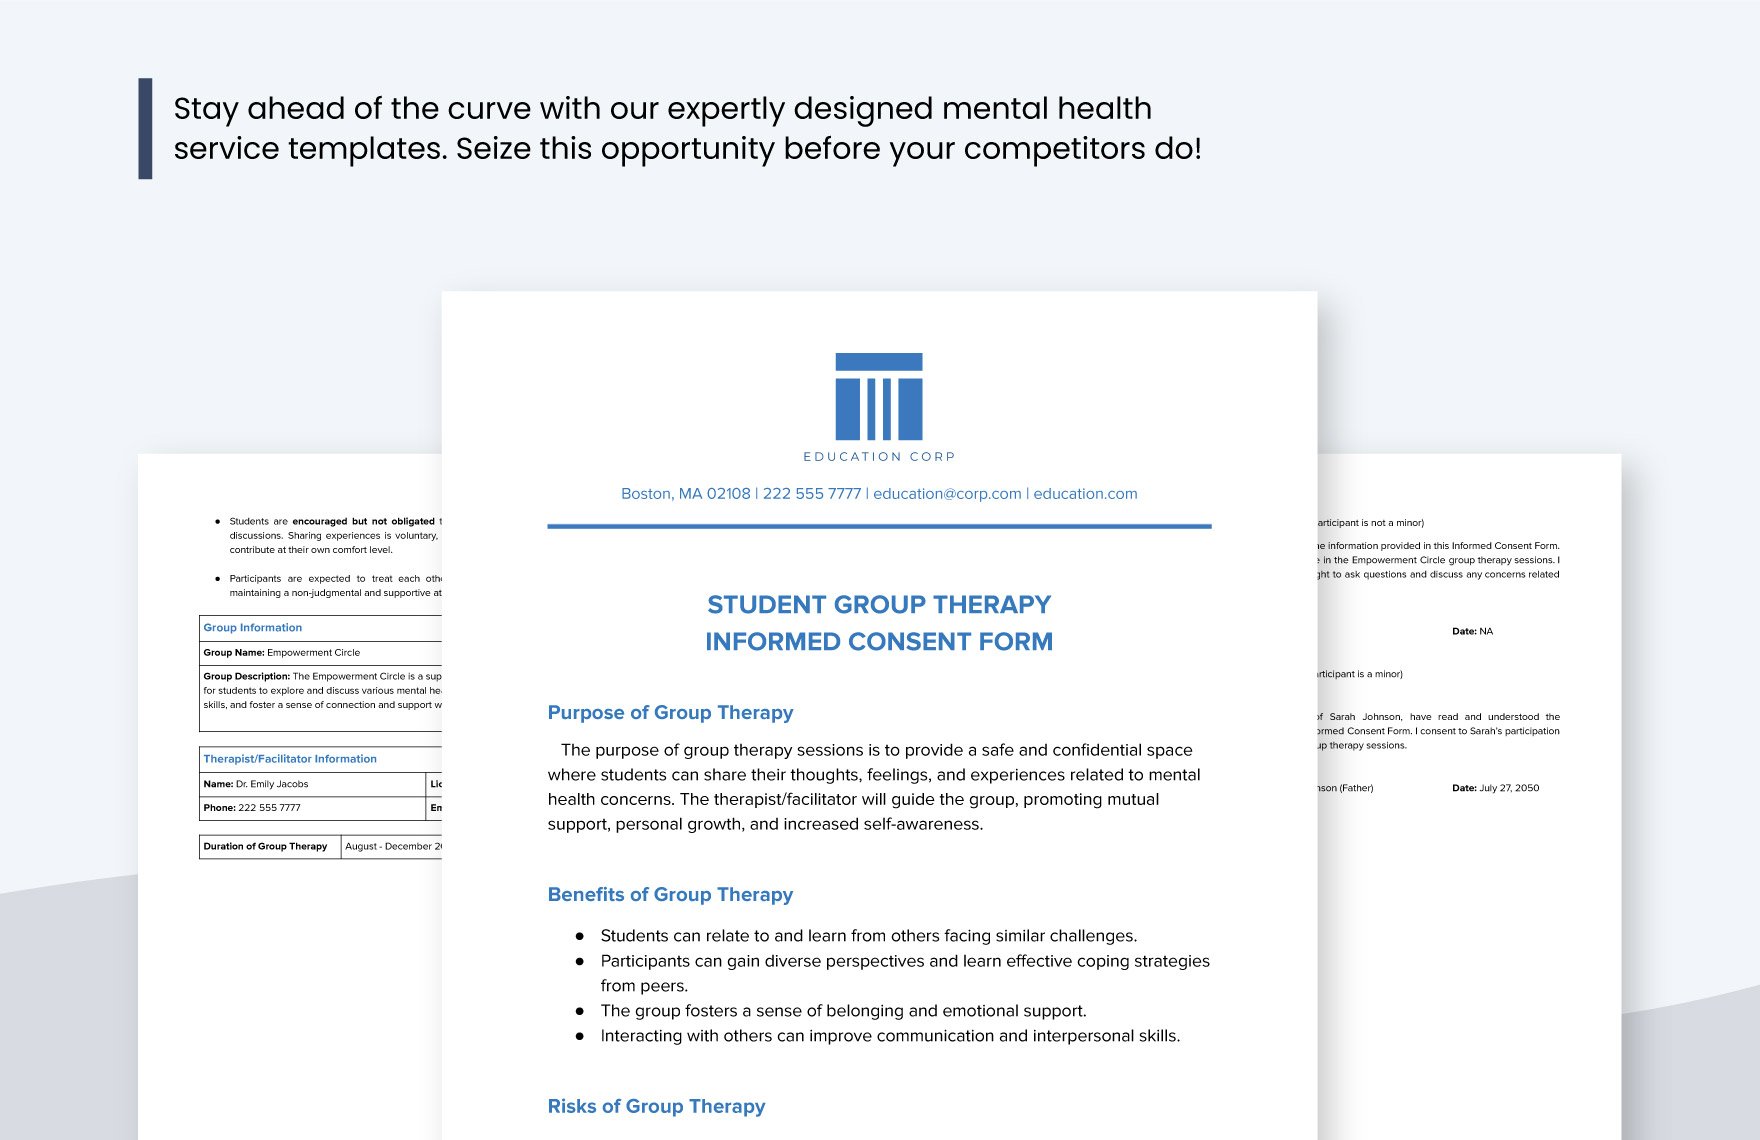 Student Group Therapy Informed Consent Form Template in GDocsLink, MS